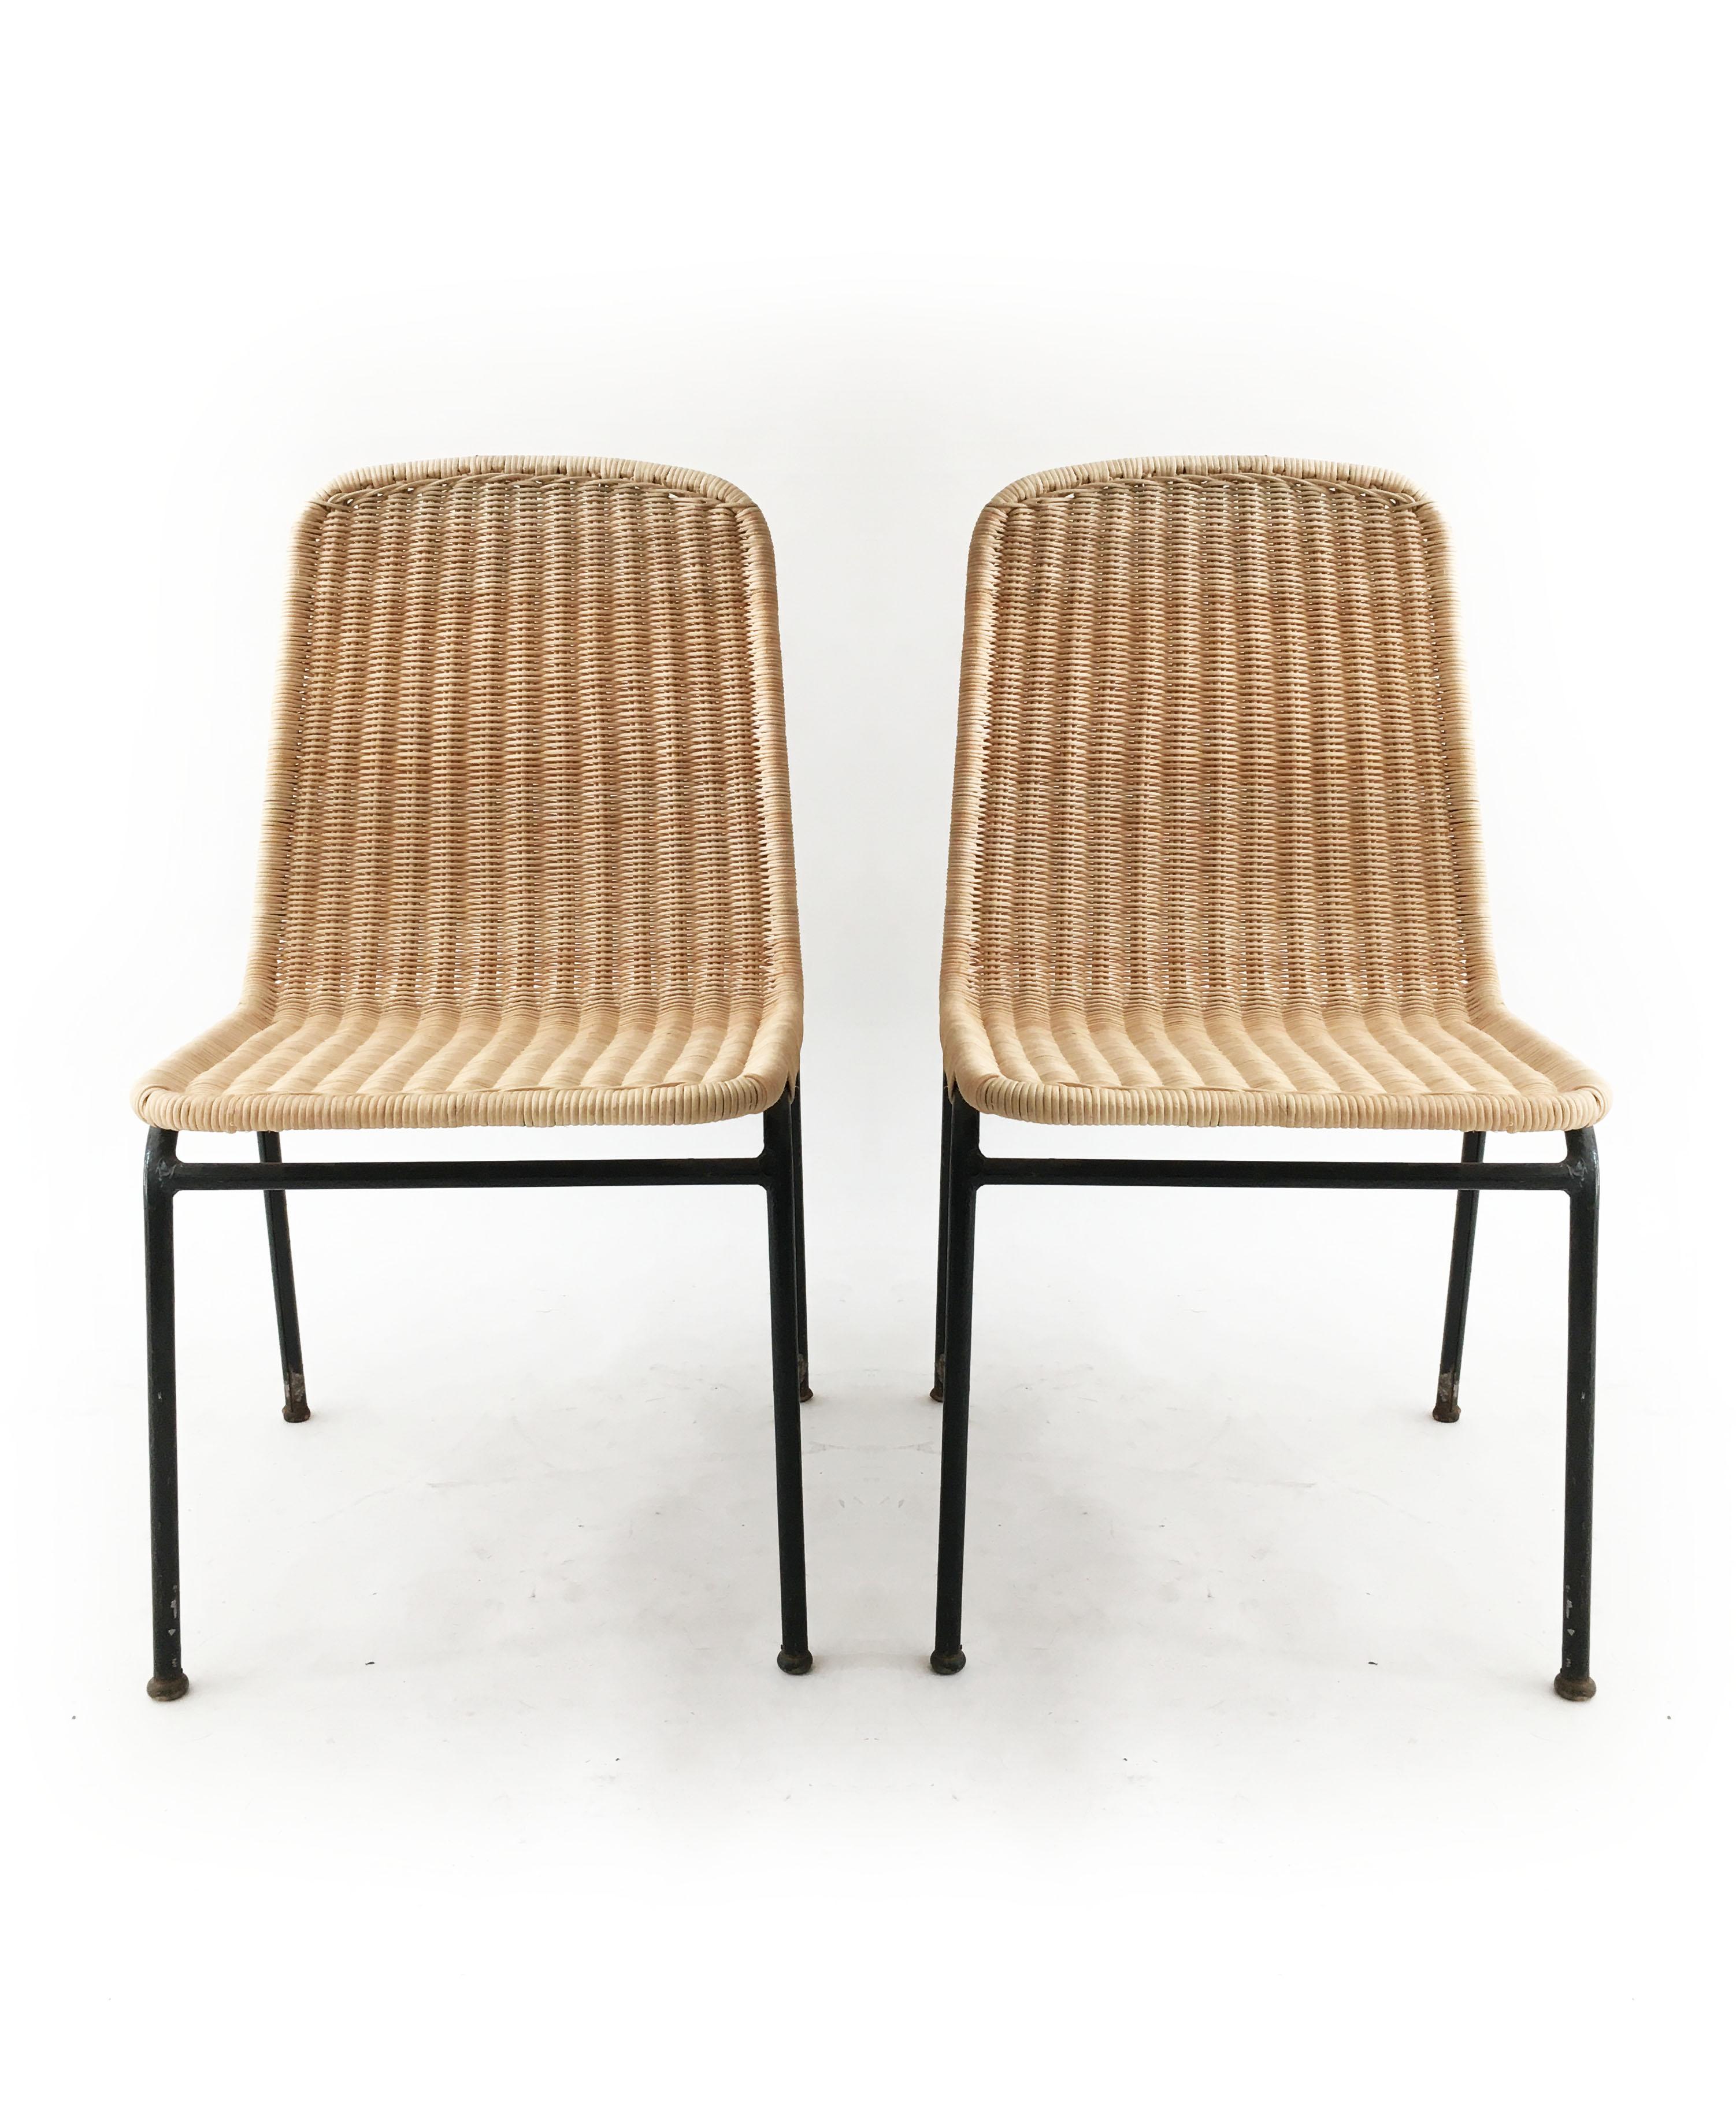 Mid-Century Modern Modernist Midcentury Wicker and Iron Chairs, Set of Two, Austria, 1950s For Sale